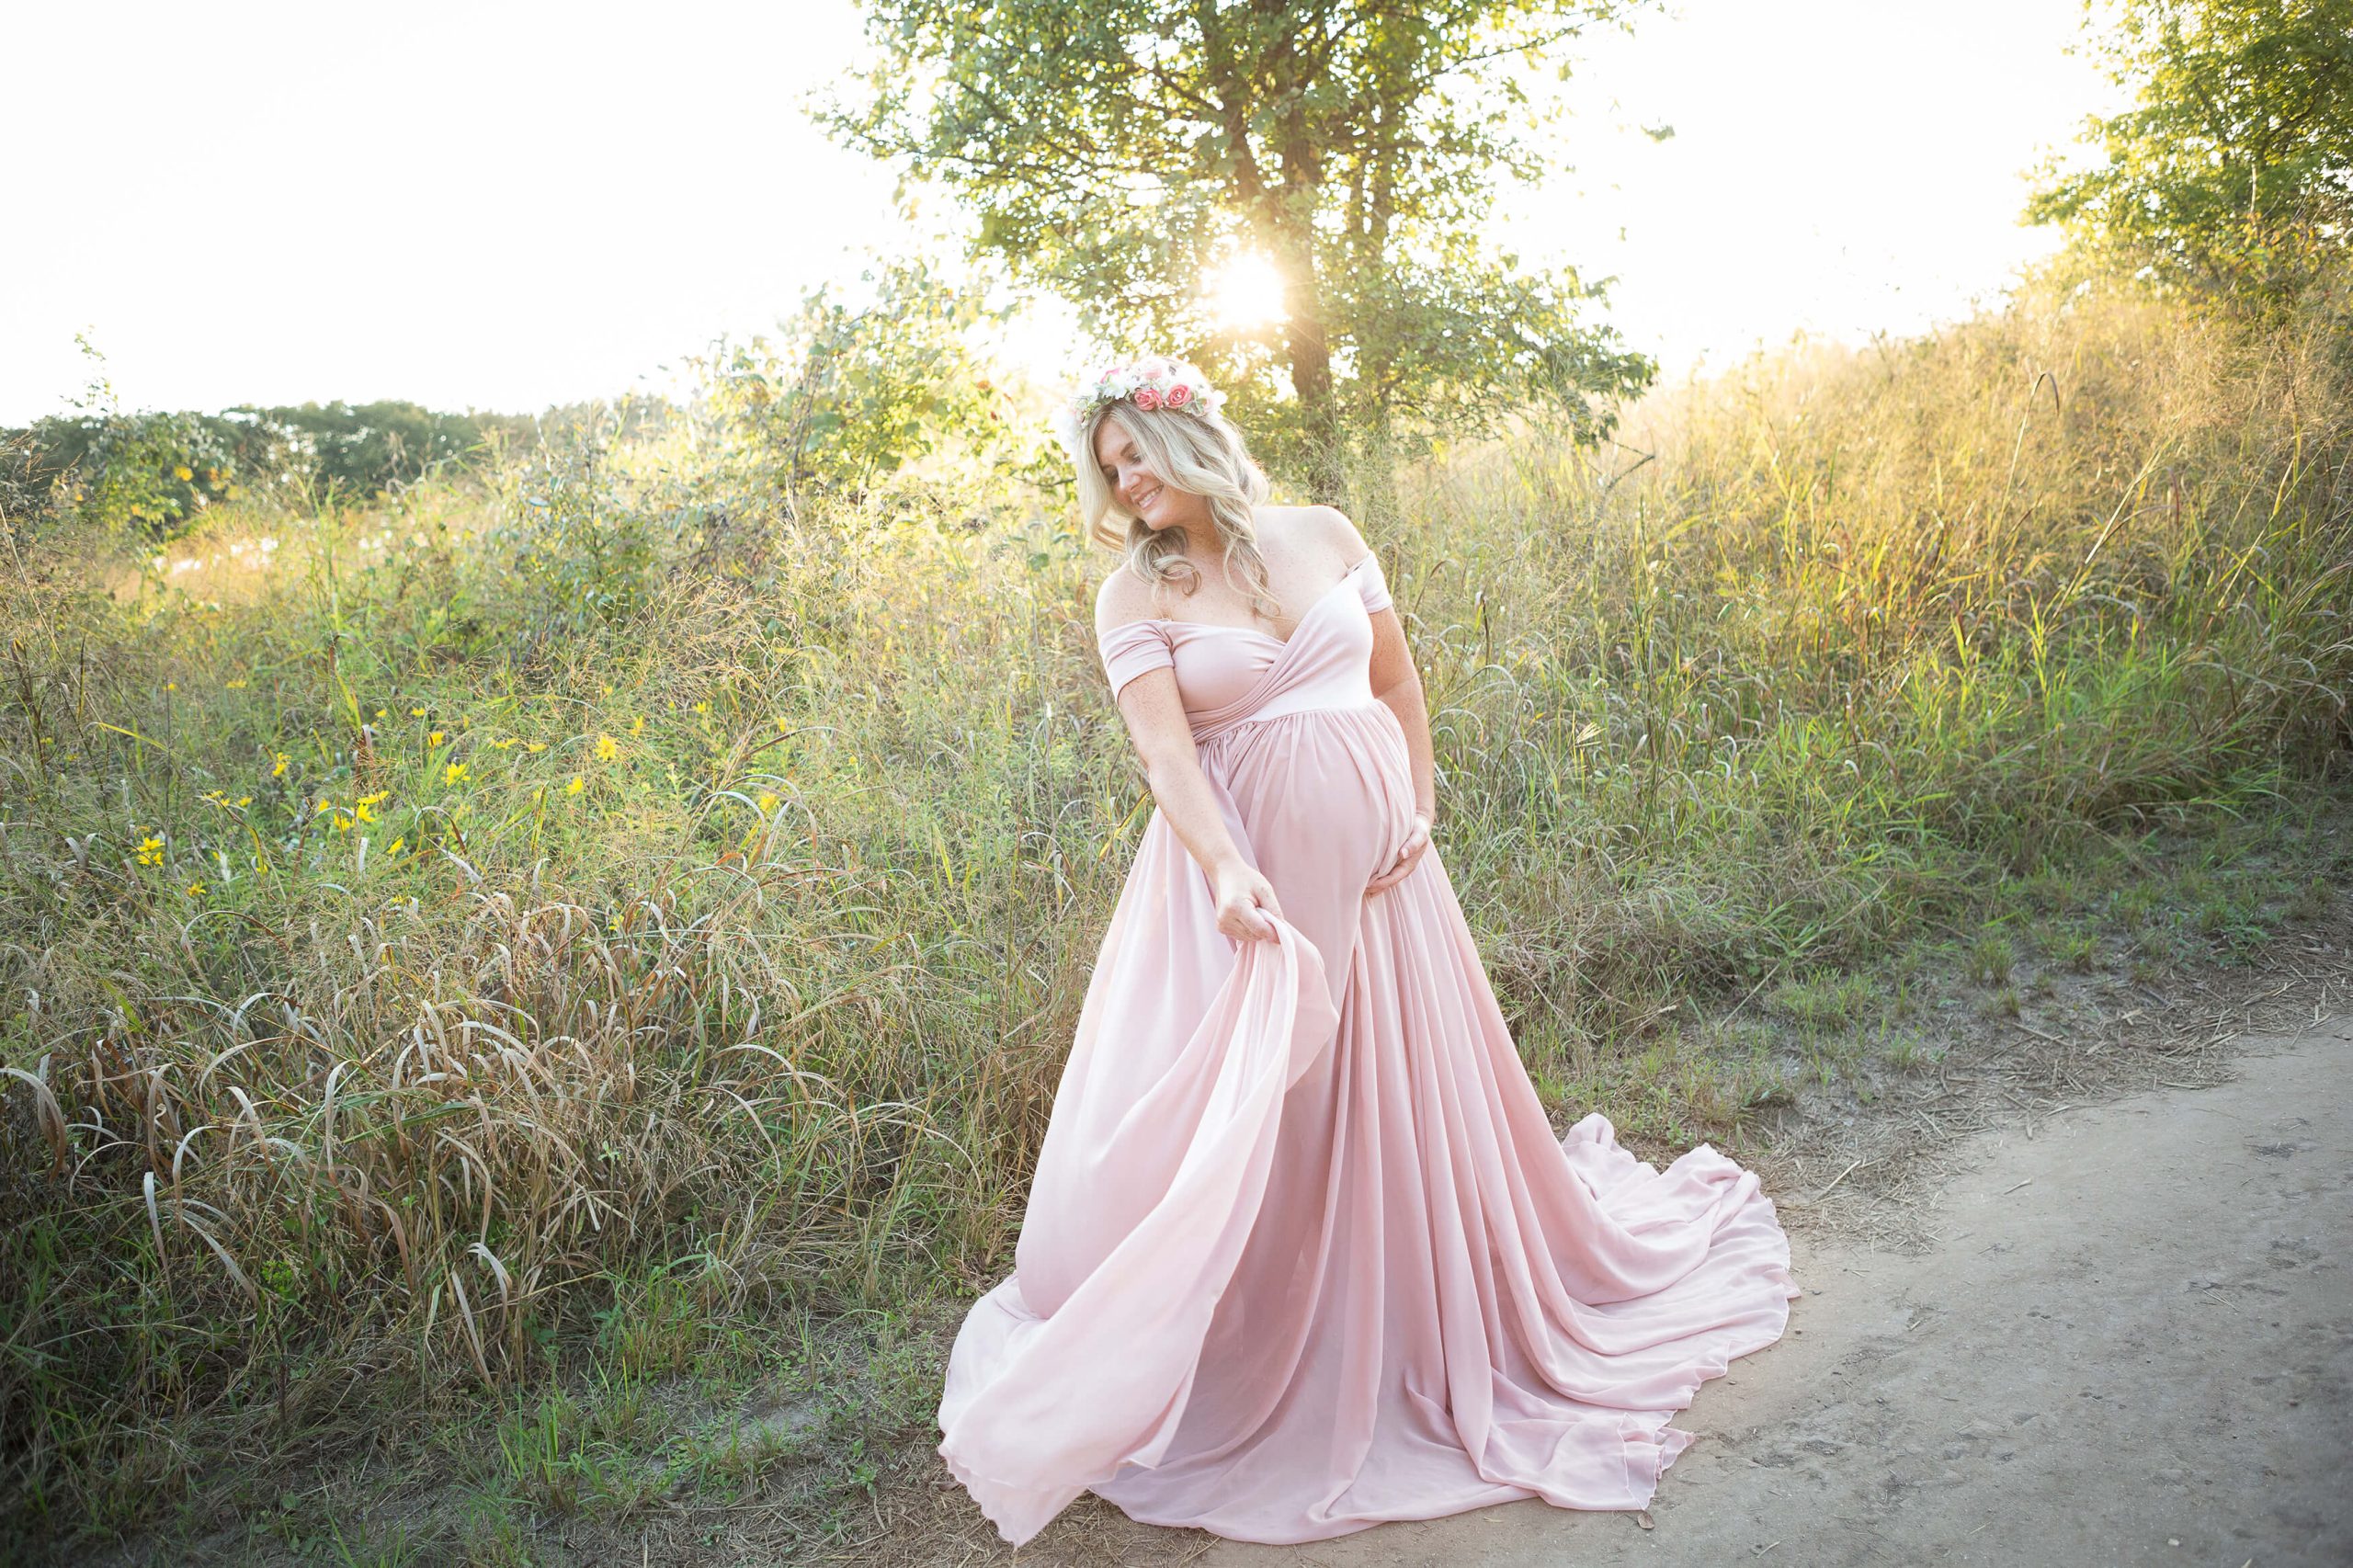 maternity photo session at the cibolo nature center in boerne texas by jenn brookover photography